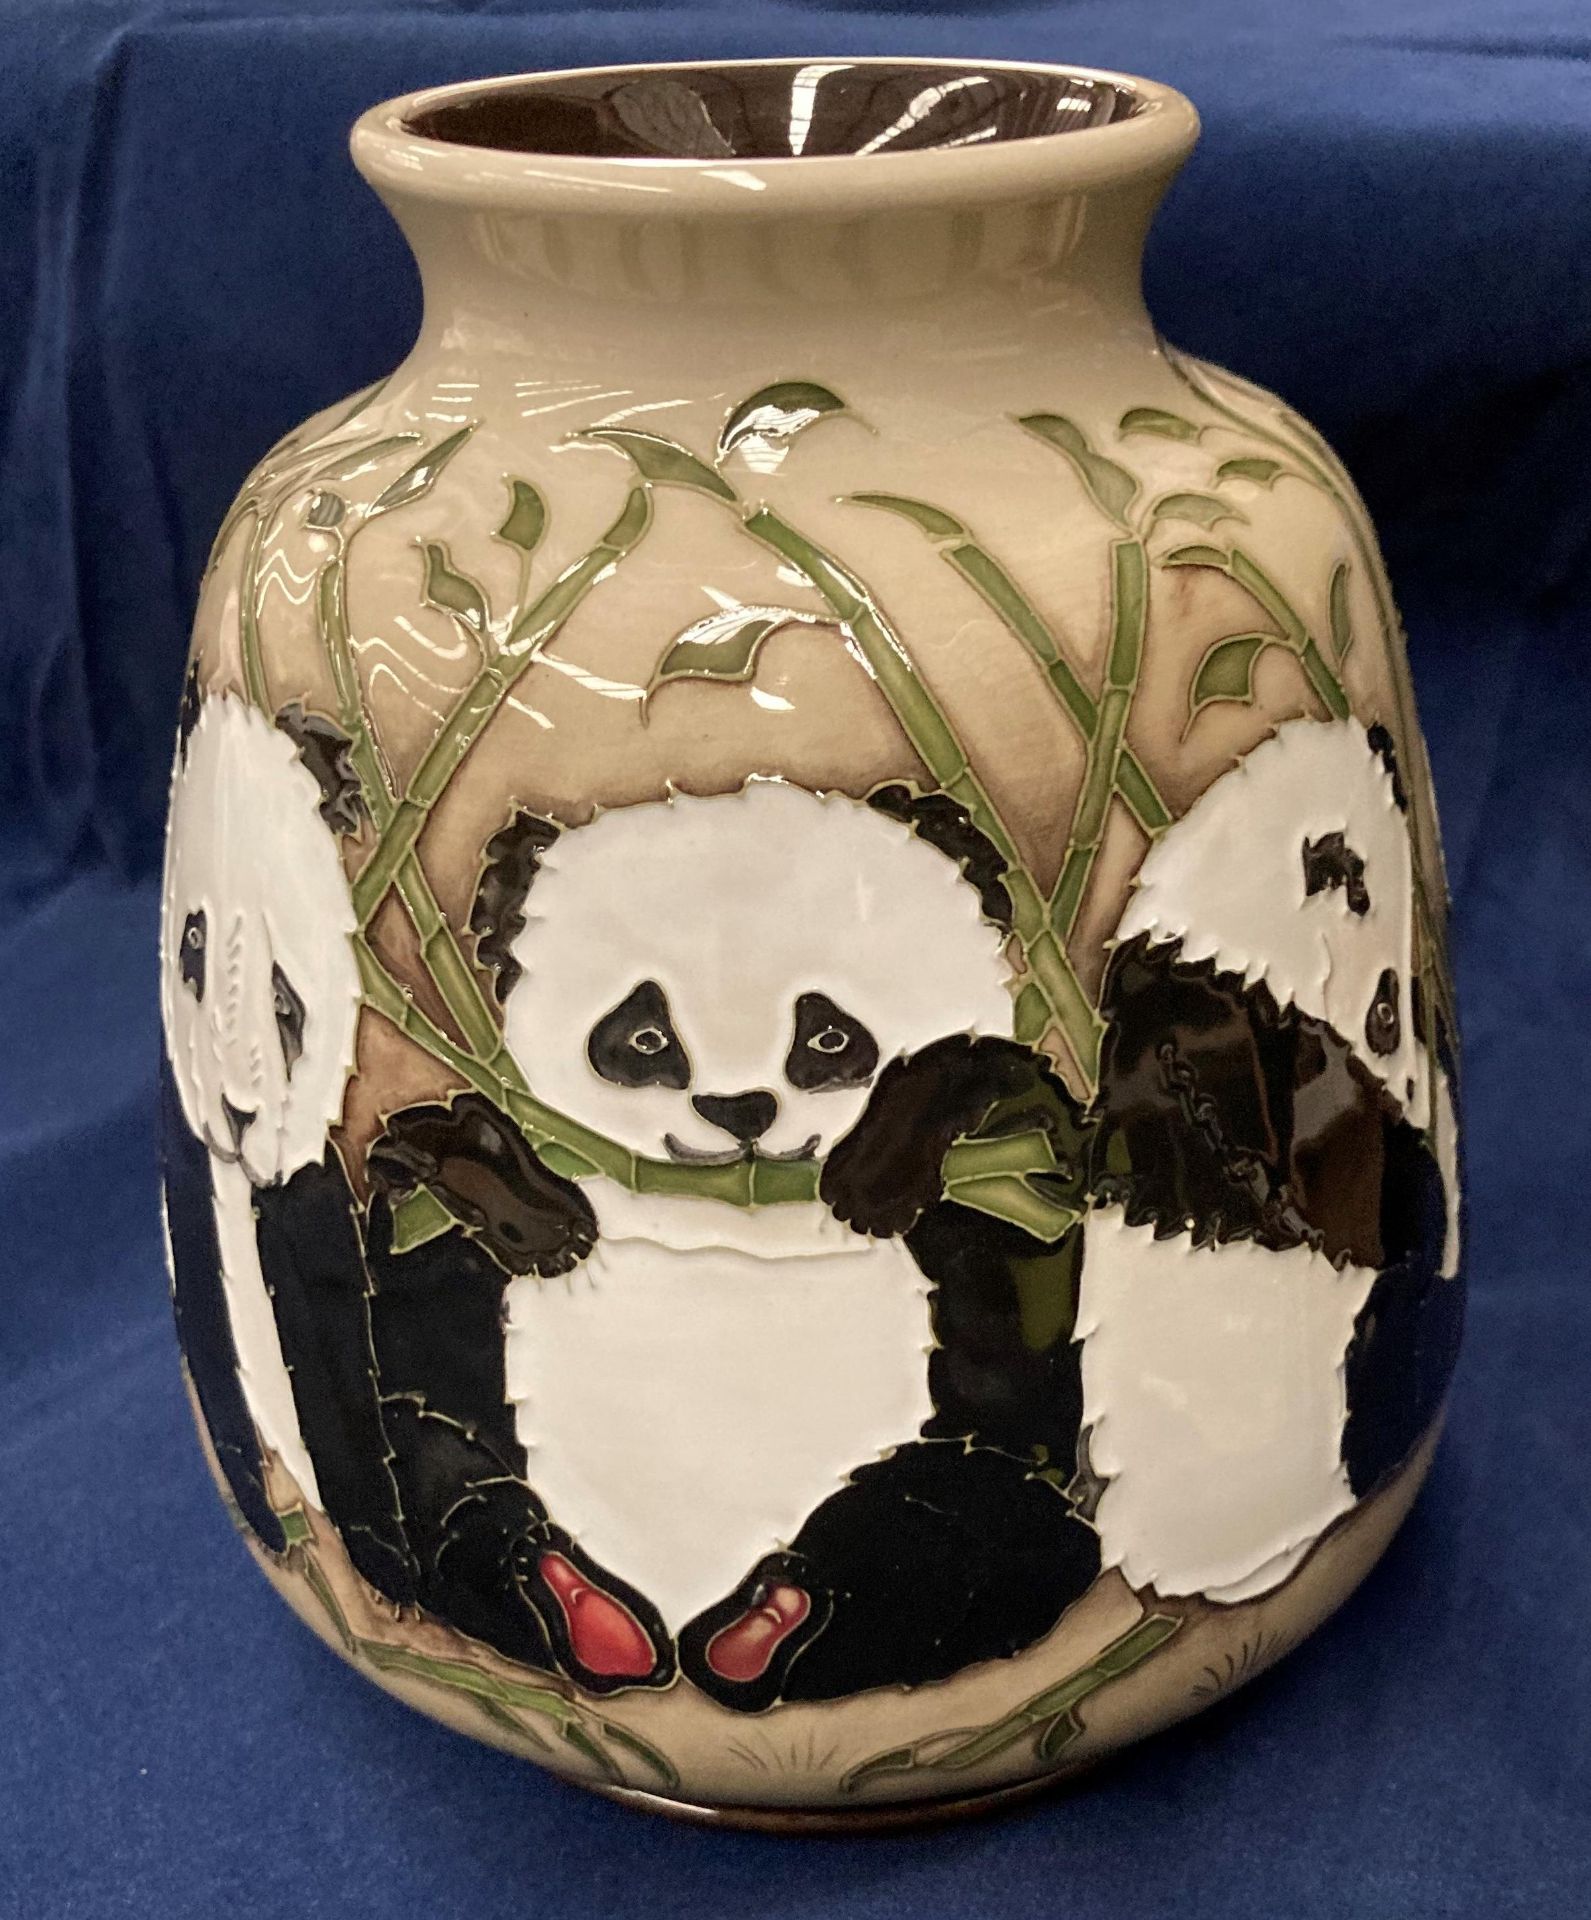 A Moorcroft 2010 The Family Panda Limited Edition vase by Marie Penkethman, no. - Image 8 of 11